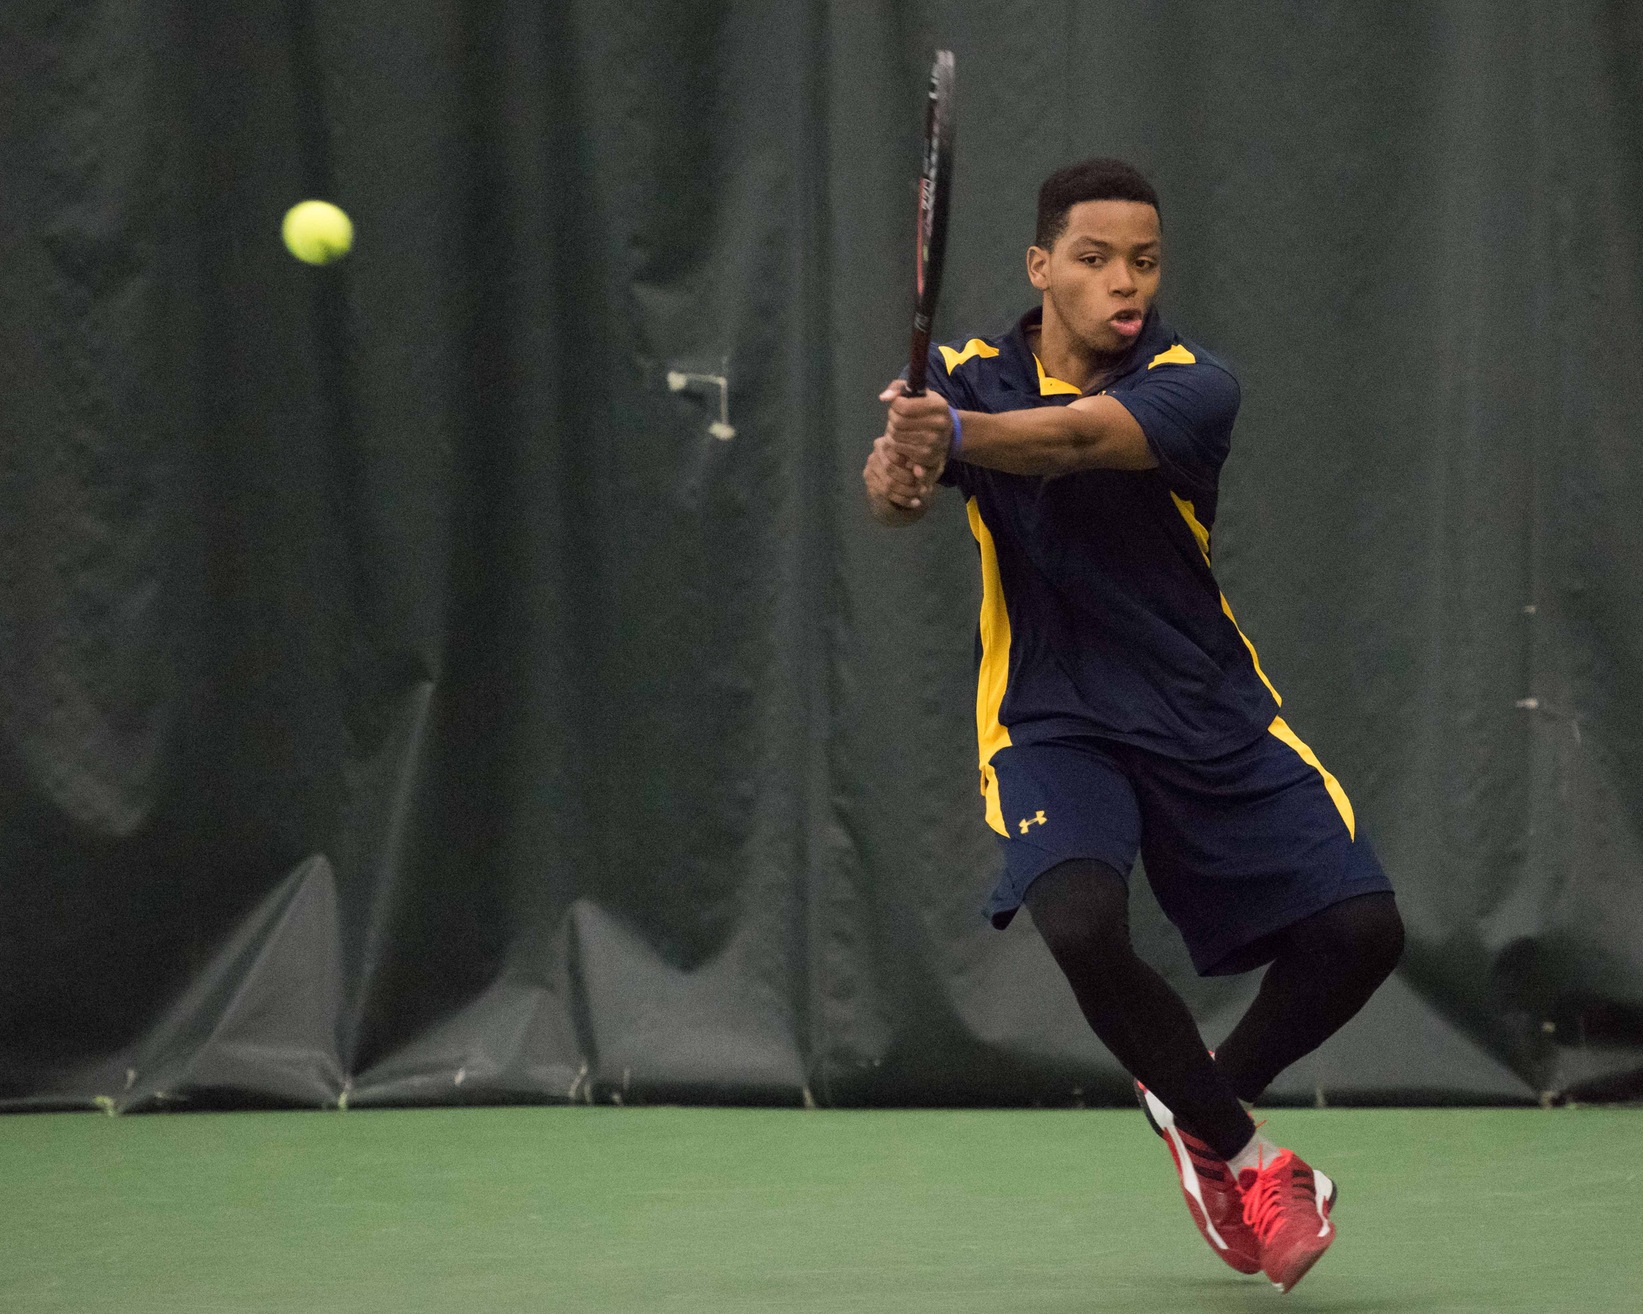 Men's Tennis falls at RIC 6-3 in non conference action